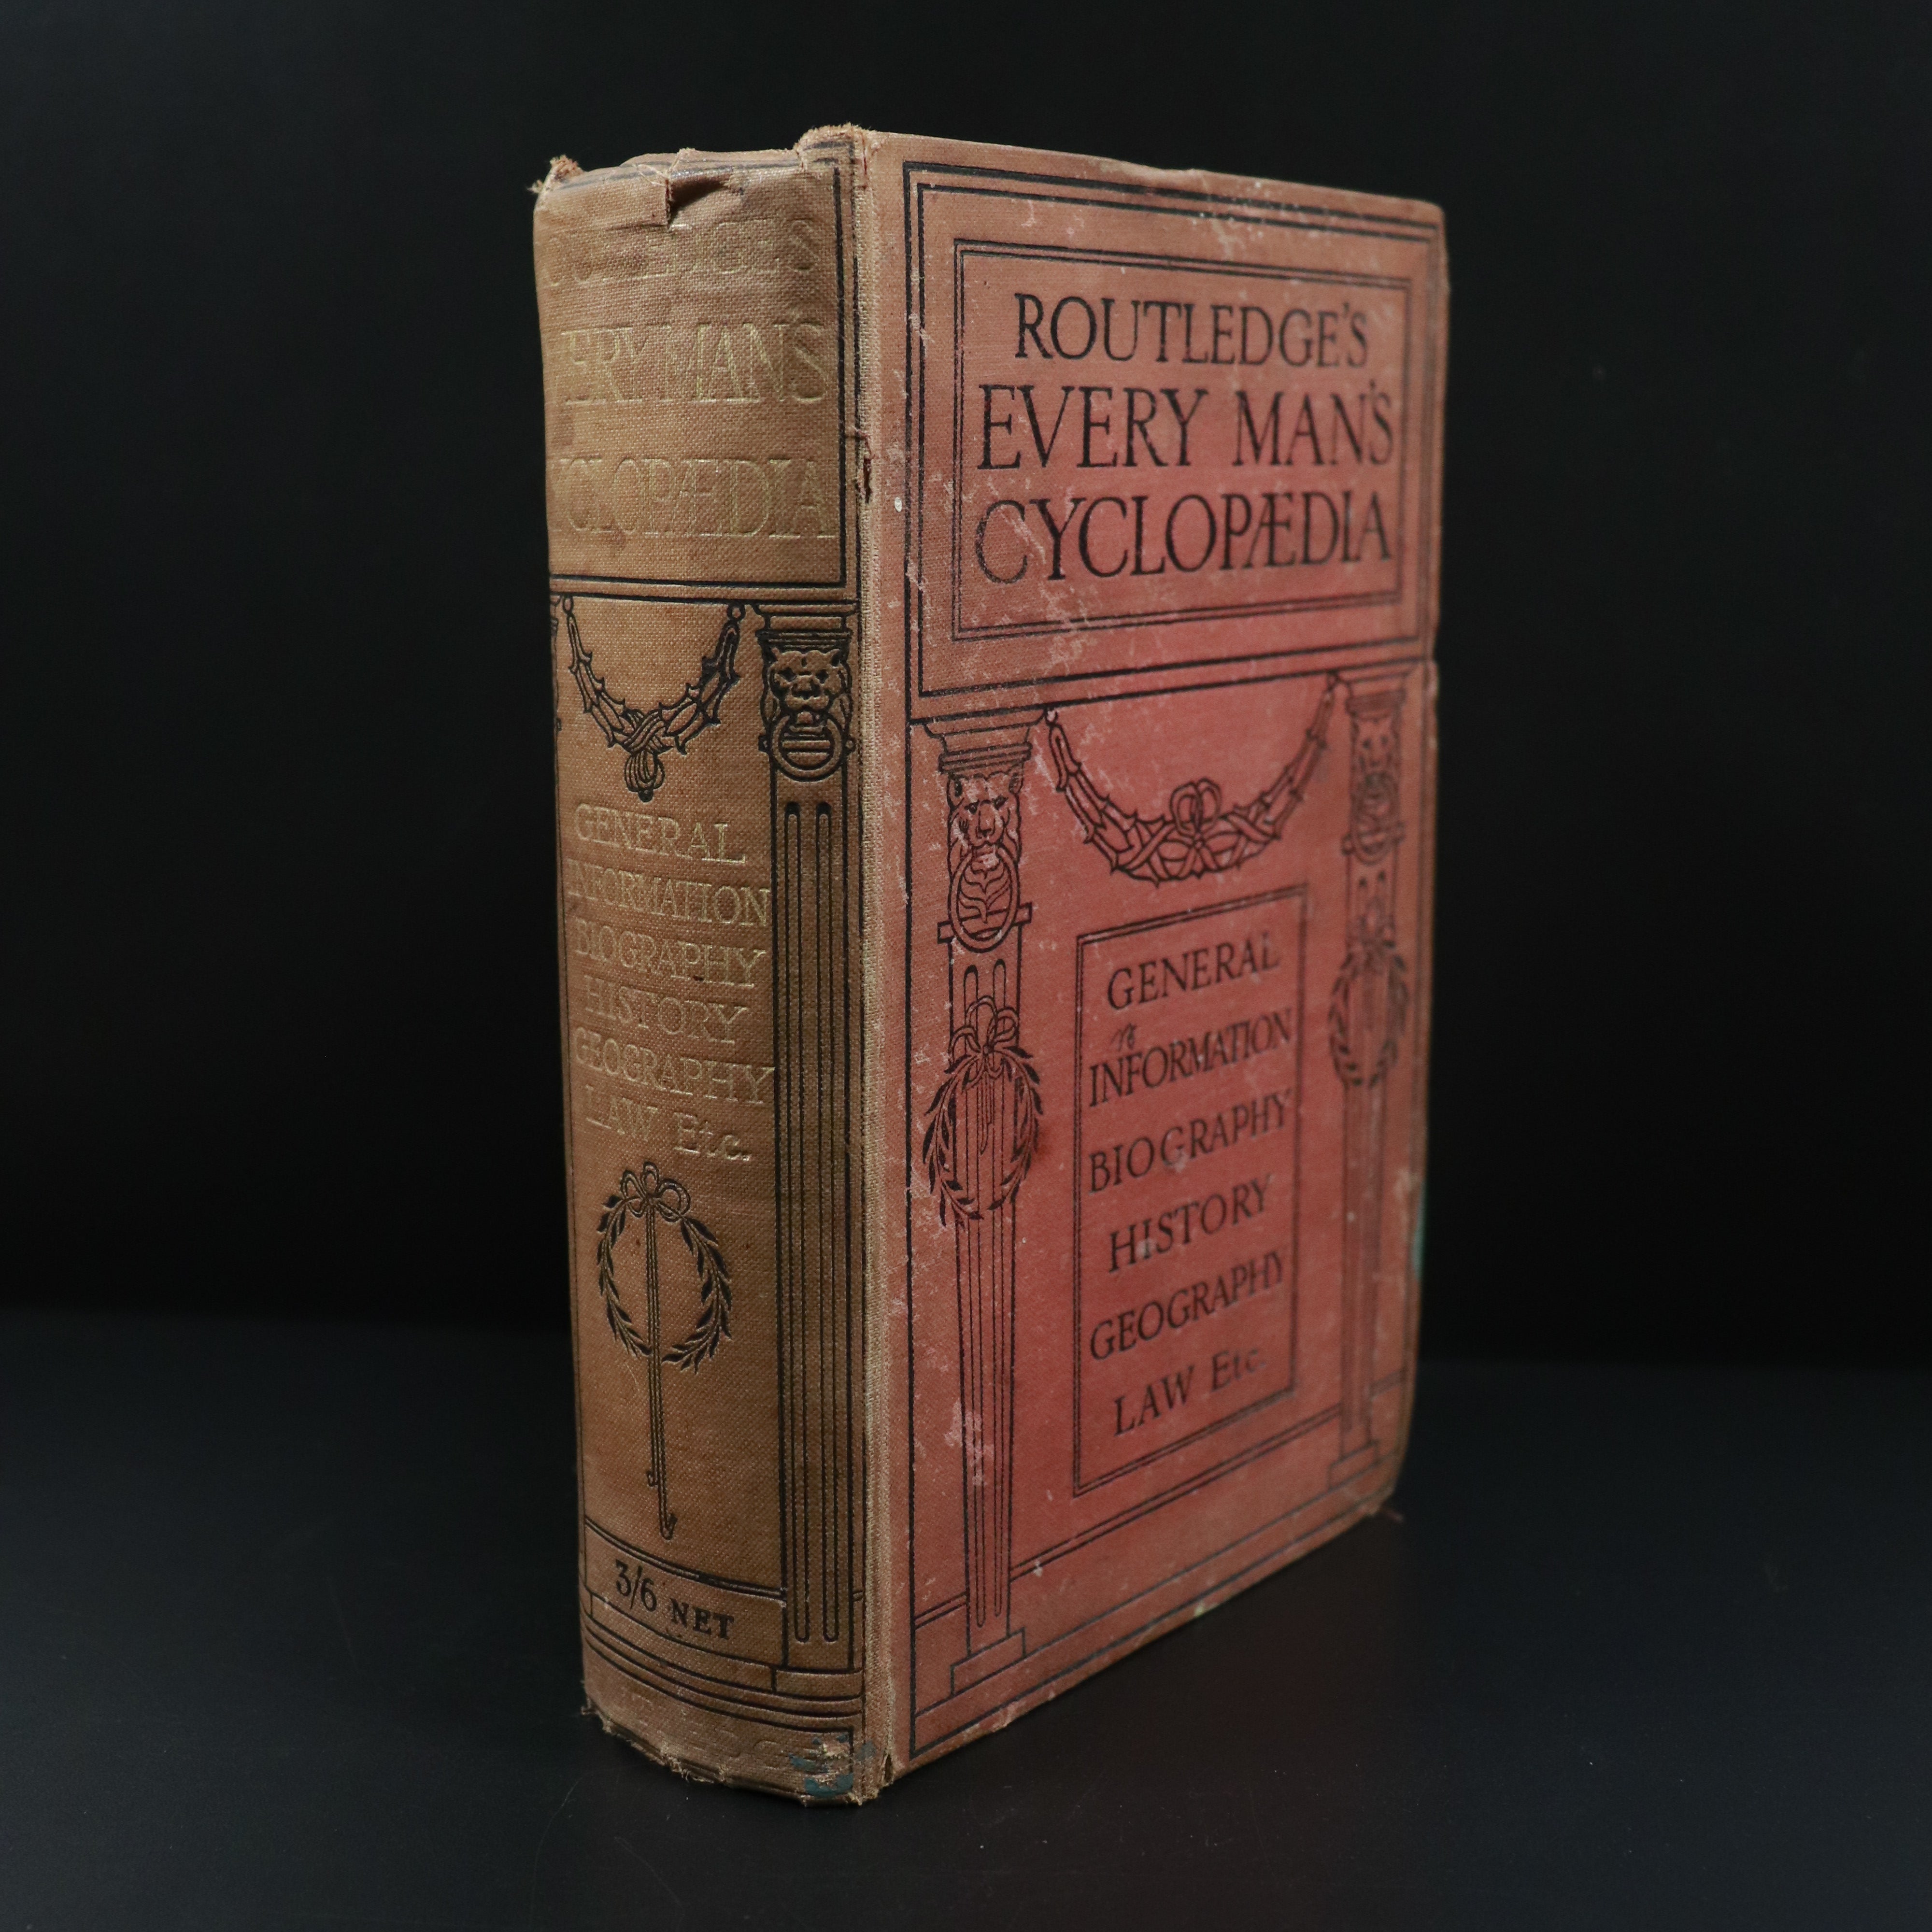 c1910 Routledge's Every Man's Cyclopaedia Antique Reference Book